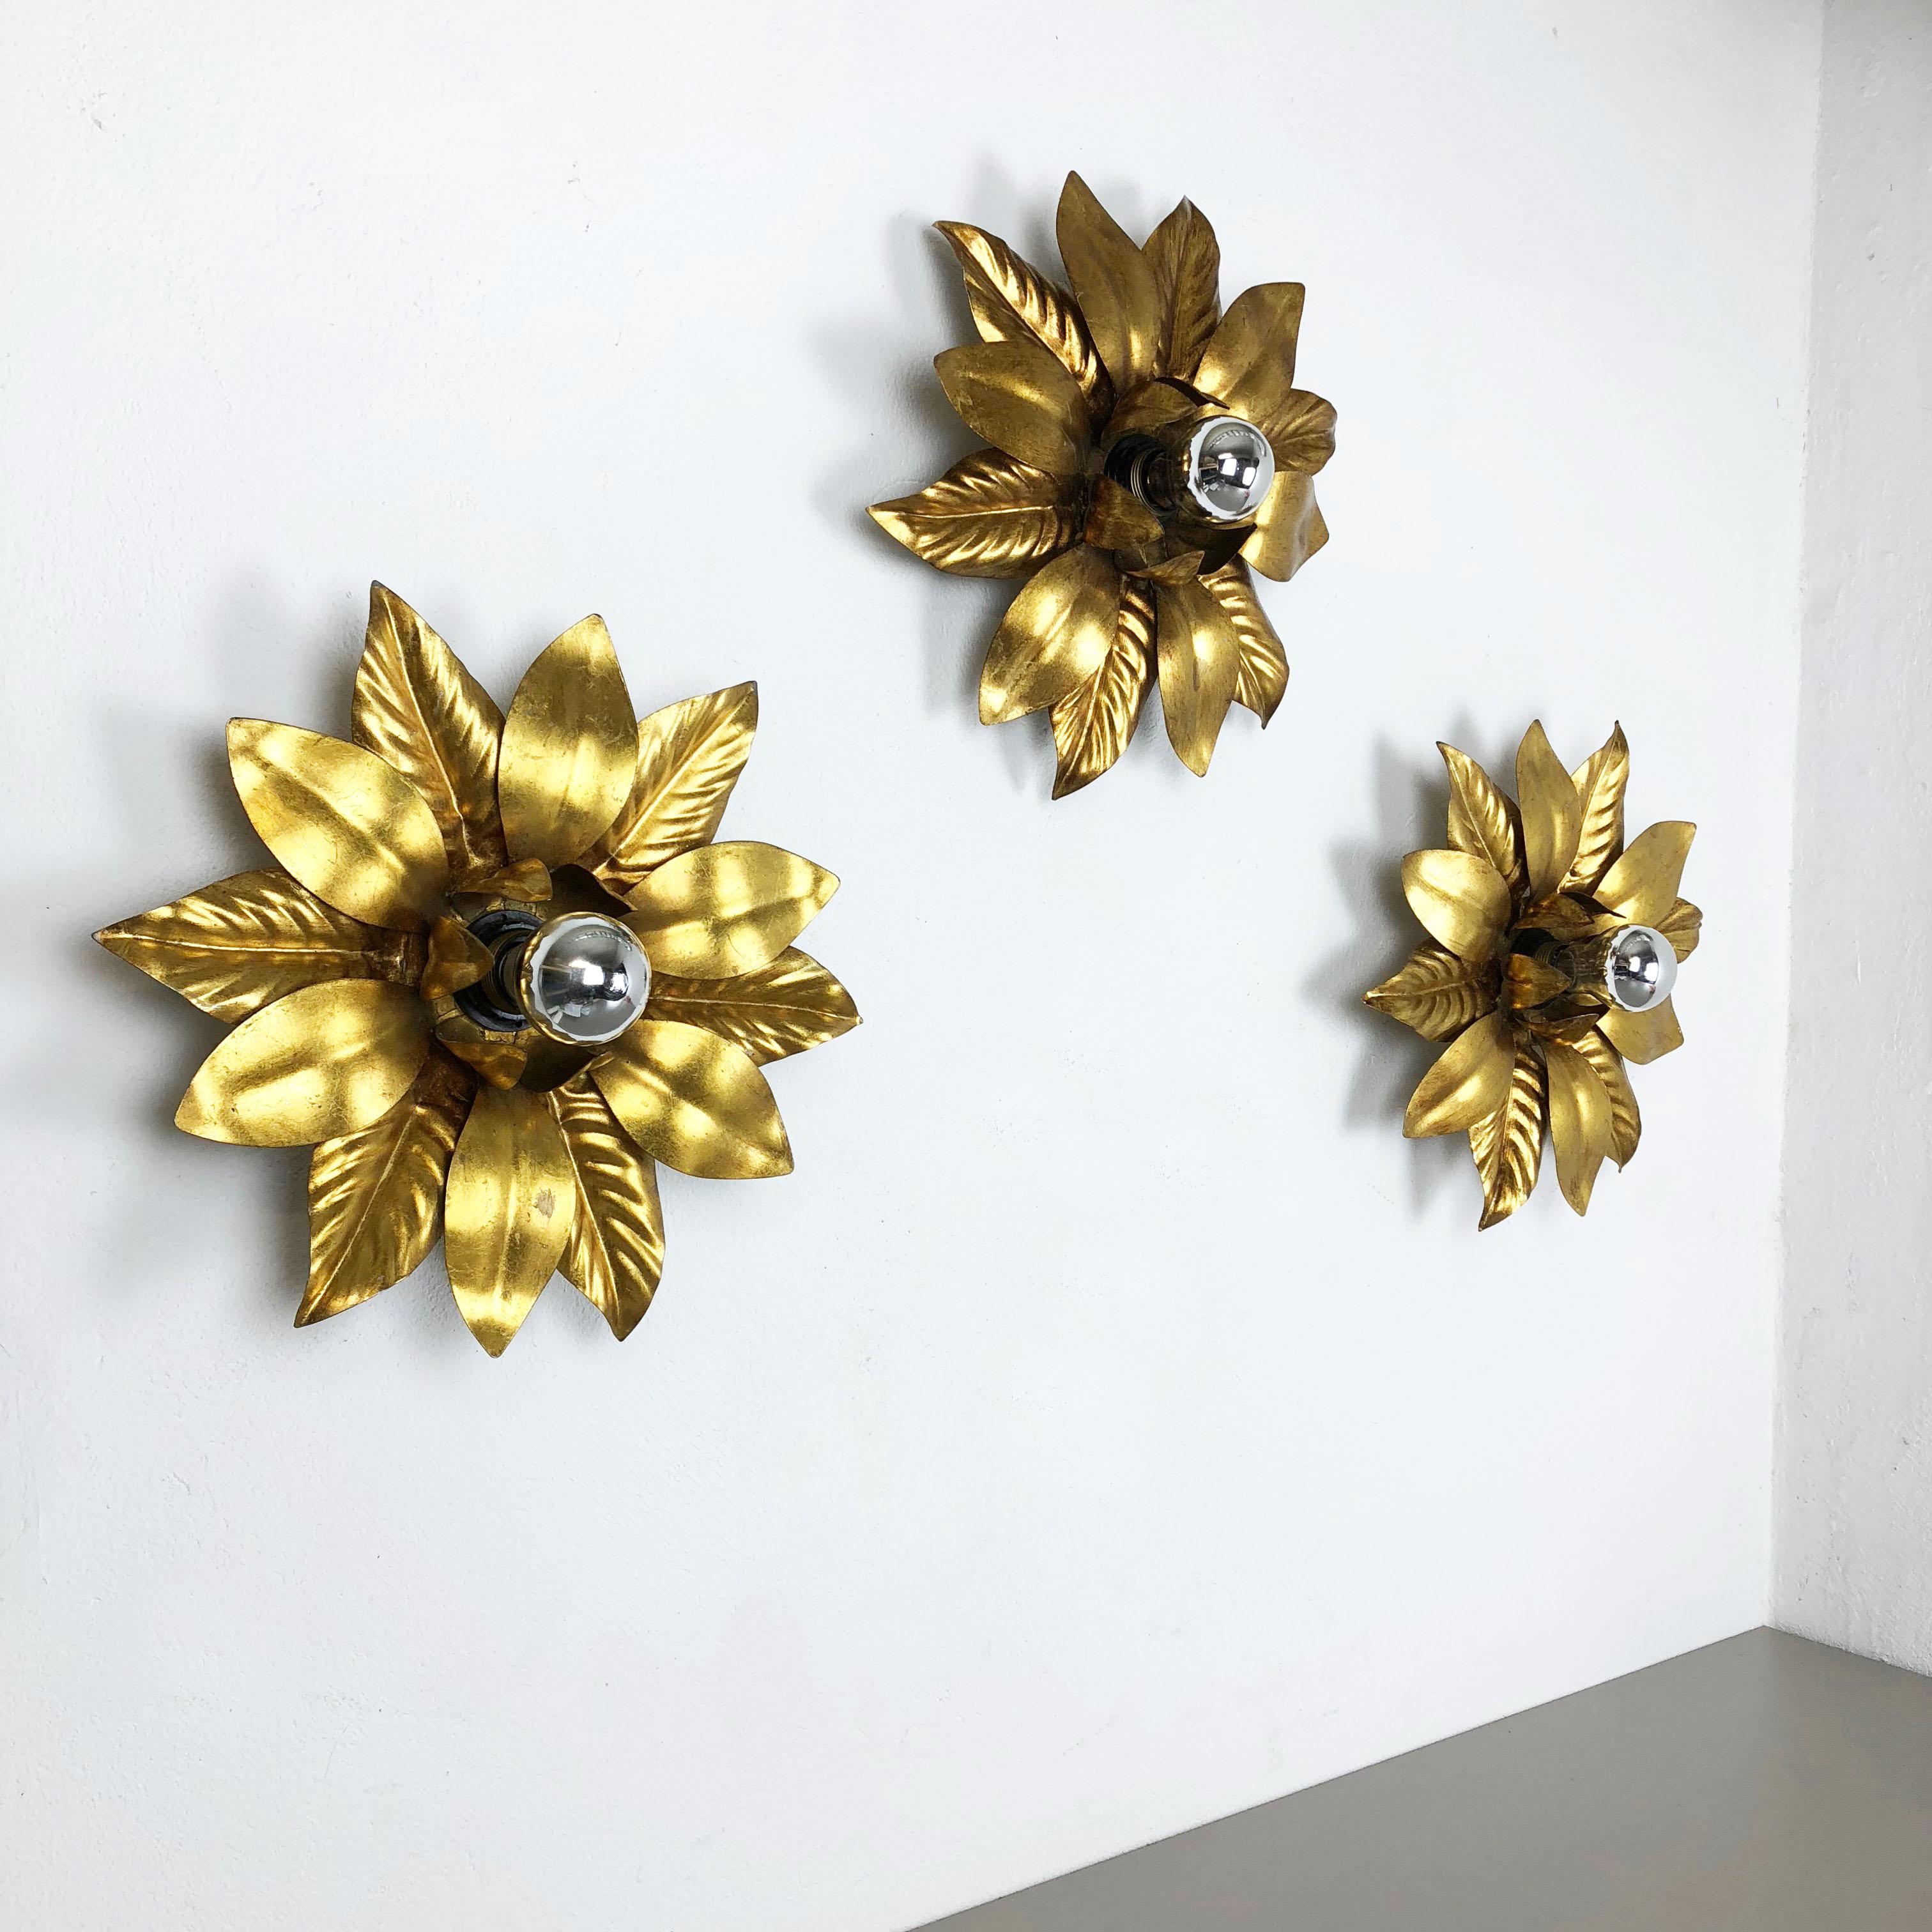 Mid-Century Modern Set of 3 Golden Florentiner Leaf Theatre Wall Ceiling Light Sconces, Italy 1960s